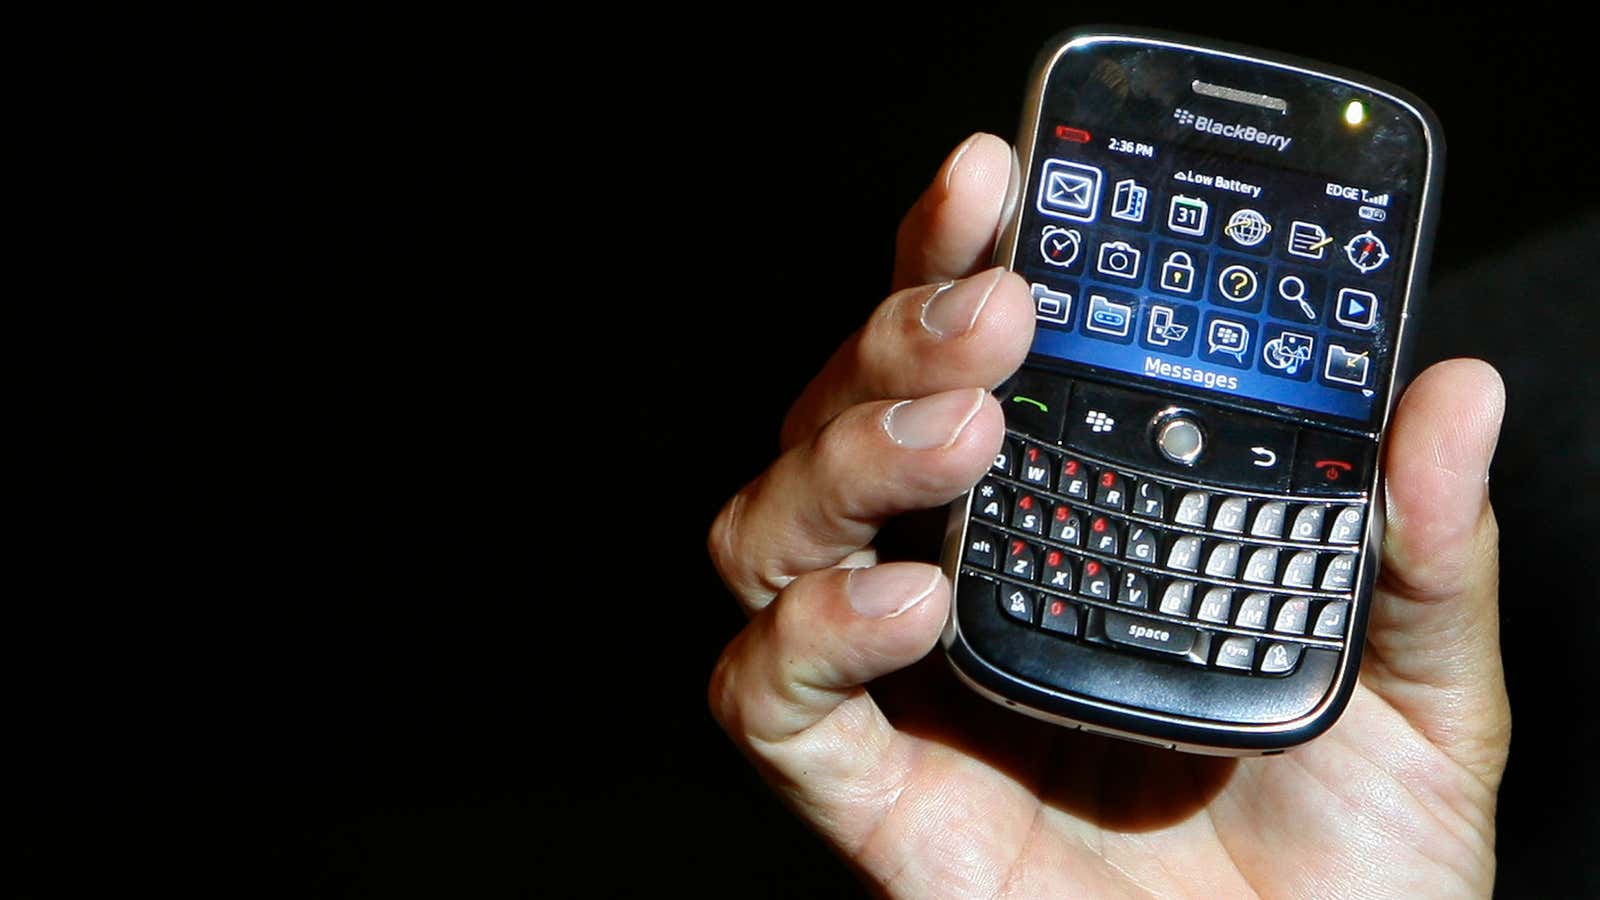 All is not lost for BlackBerry.